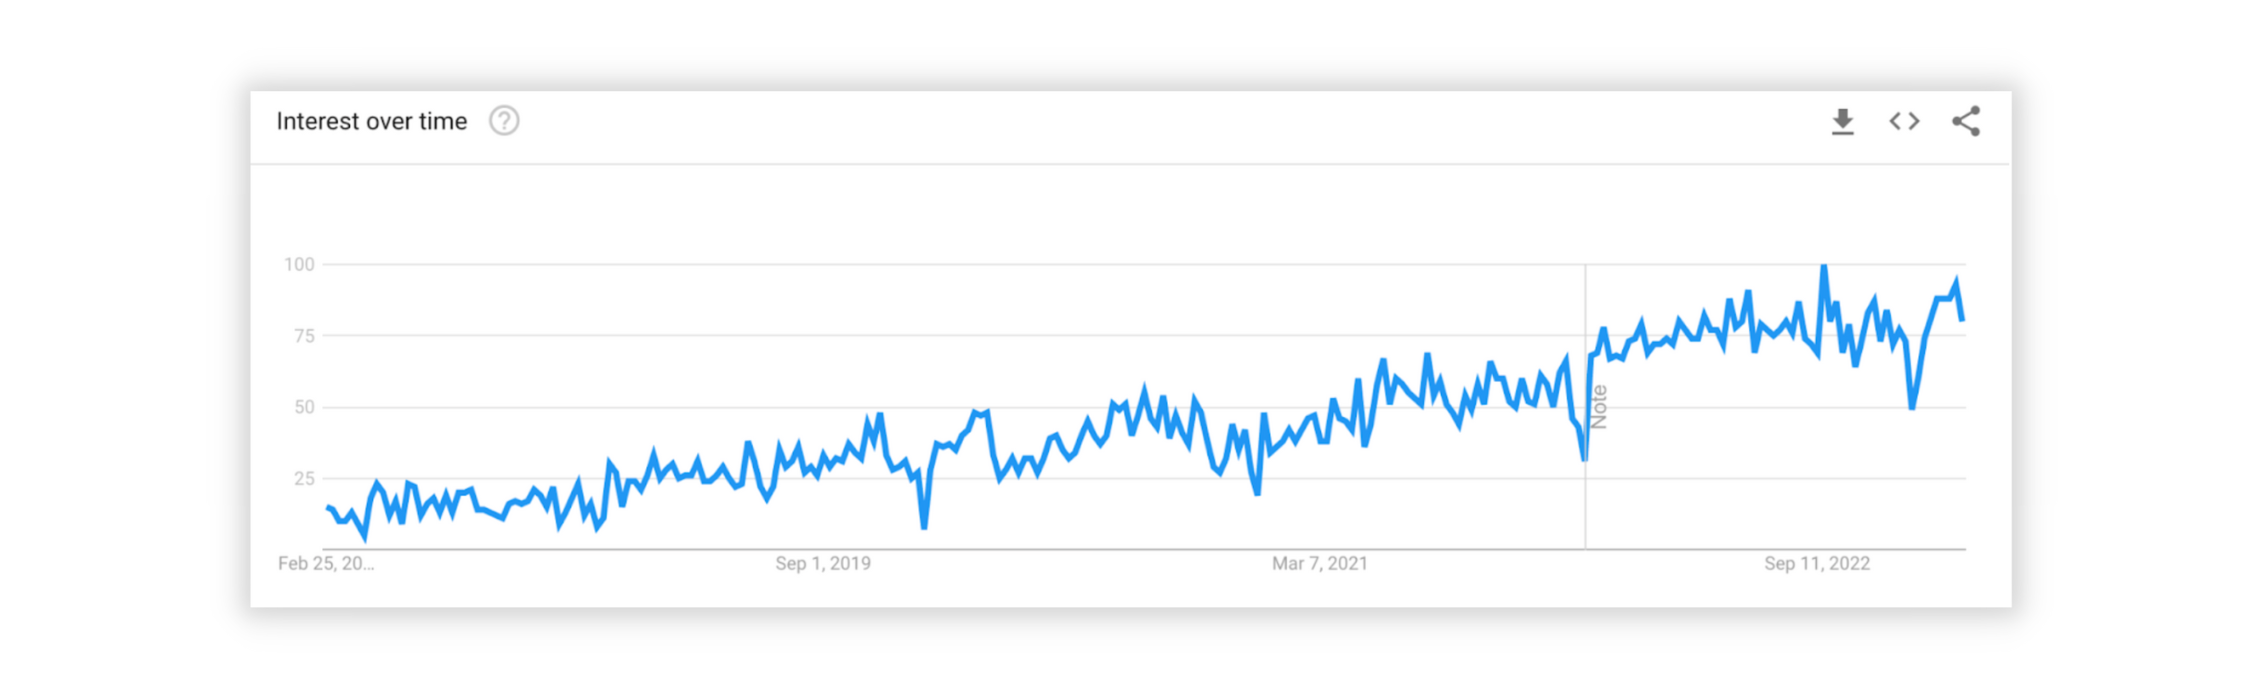 Google Trends chart for the product development trend DevSecOps